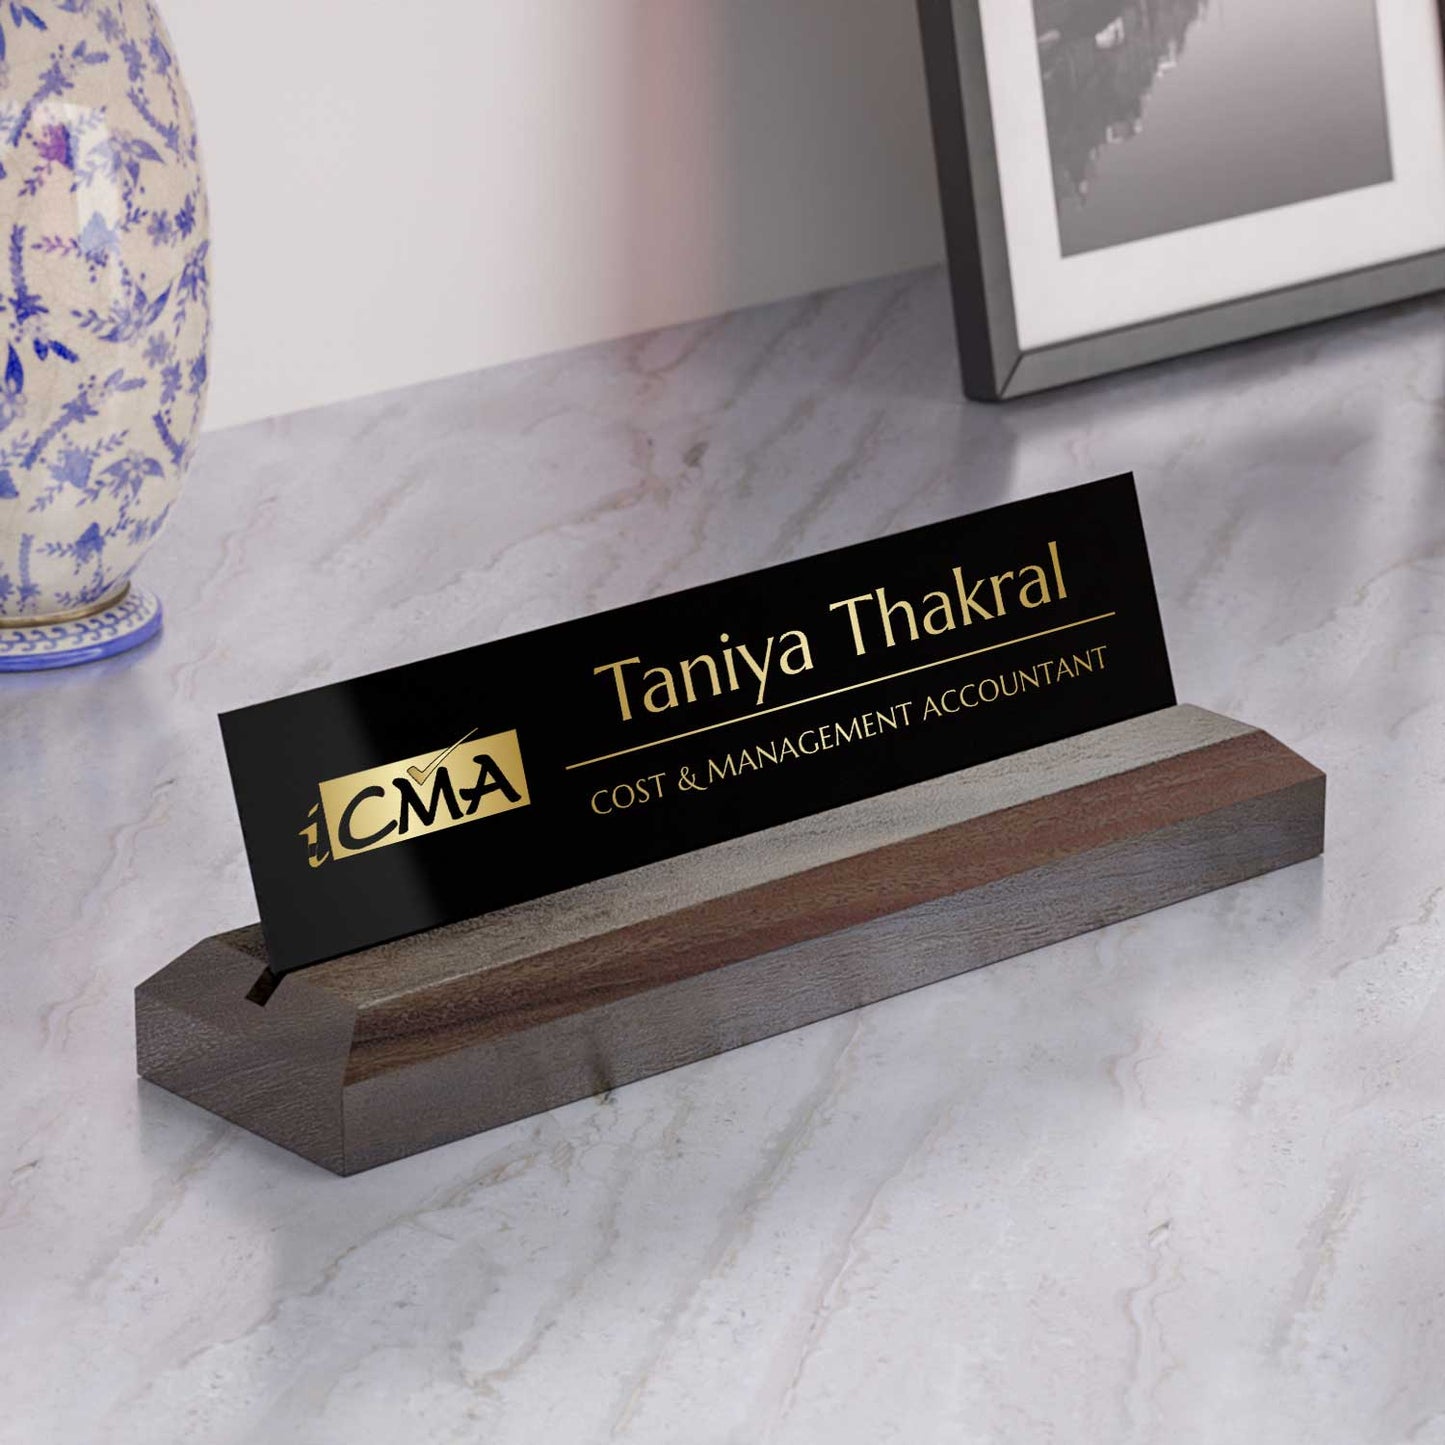 Excelus Office Desk Name Plate - Cost & Management Accountant (CMA)